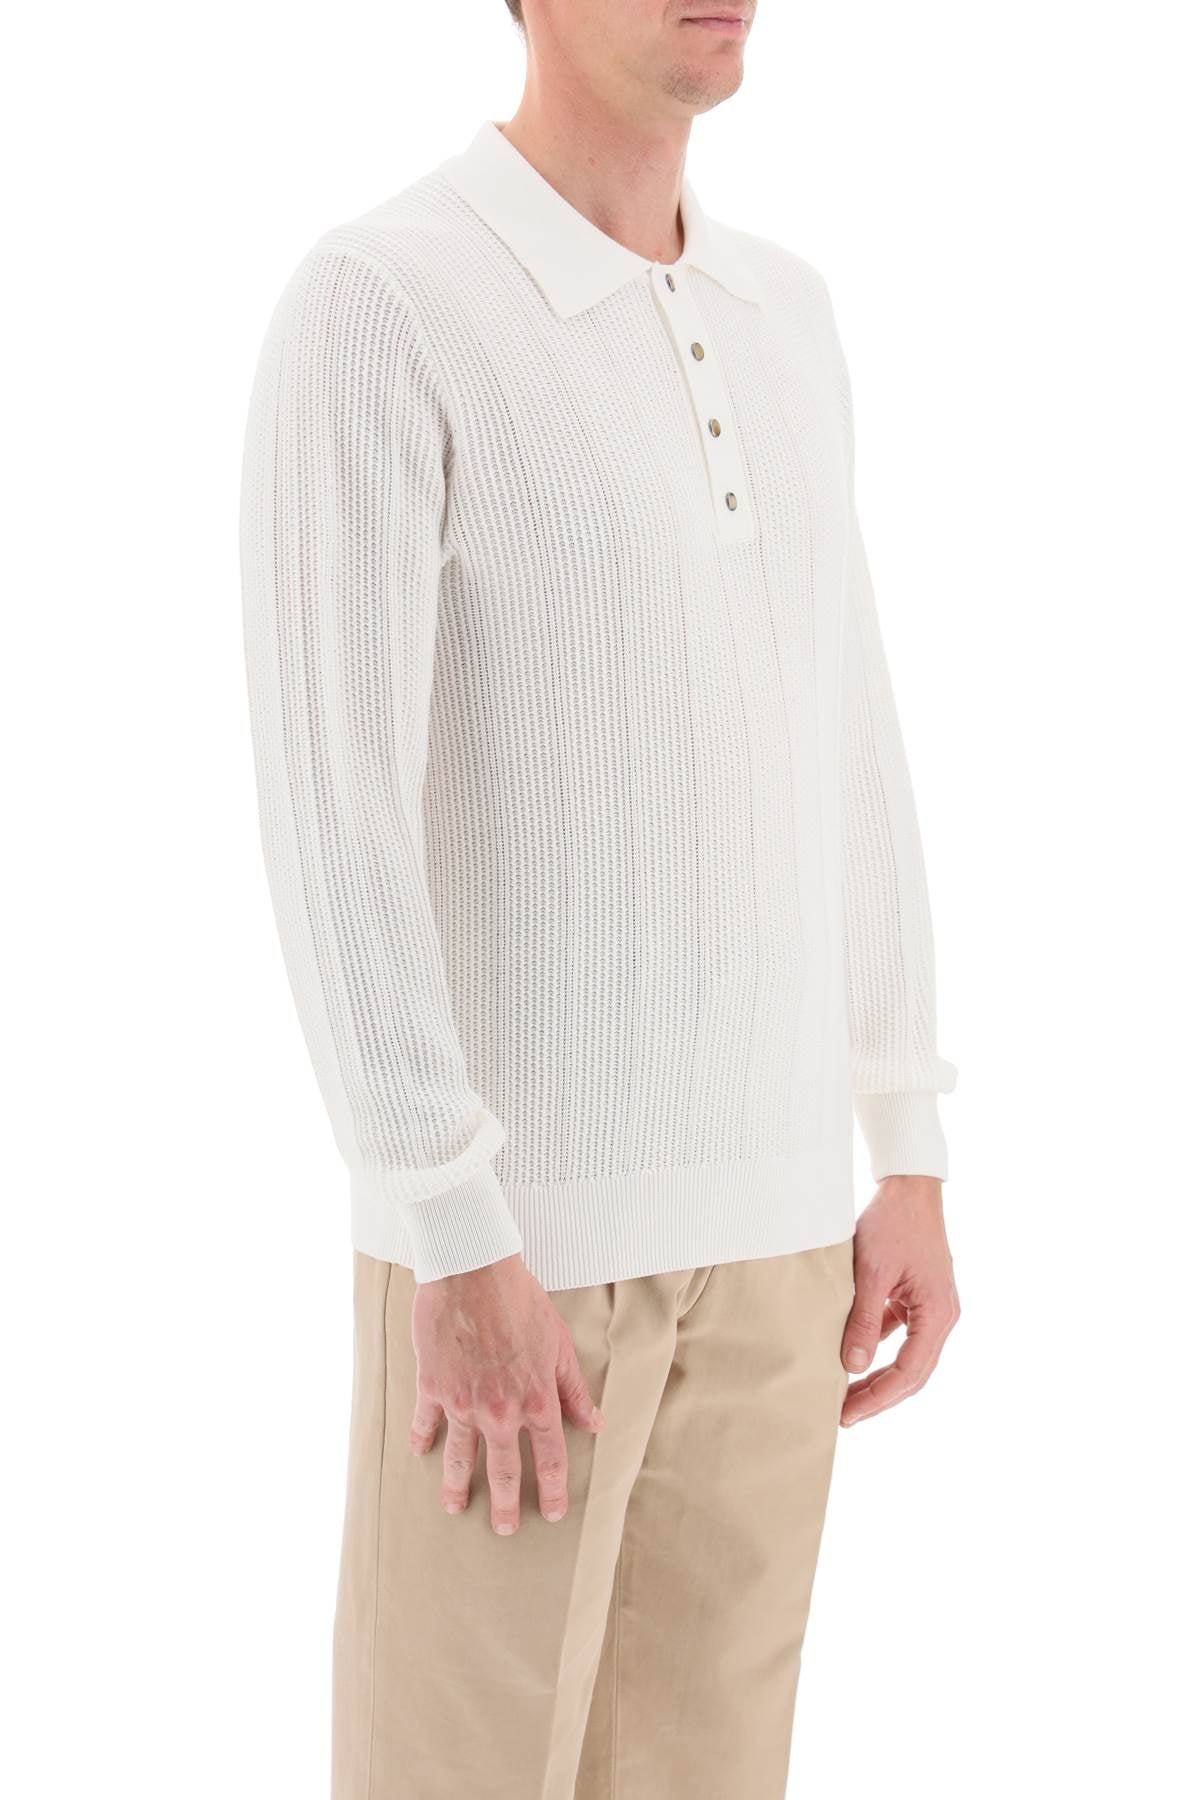 Brunello cucinelli long-sleeved knitted polo shirt-men > clothing > t-shirts and sweatshirts > polos-Brunello Cucinelli-Urbanheer